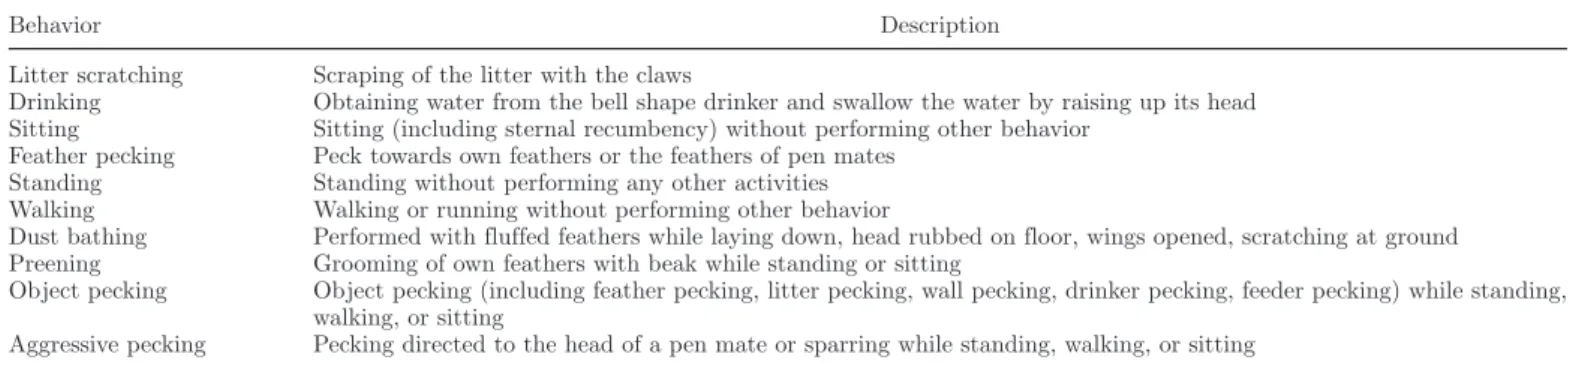 Table 1. Ethogram of recorded behavior according to Bokkers and Koene (2003).